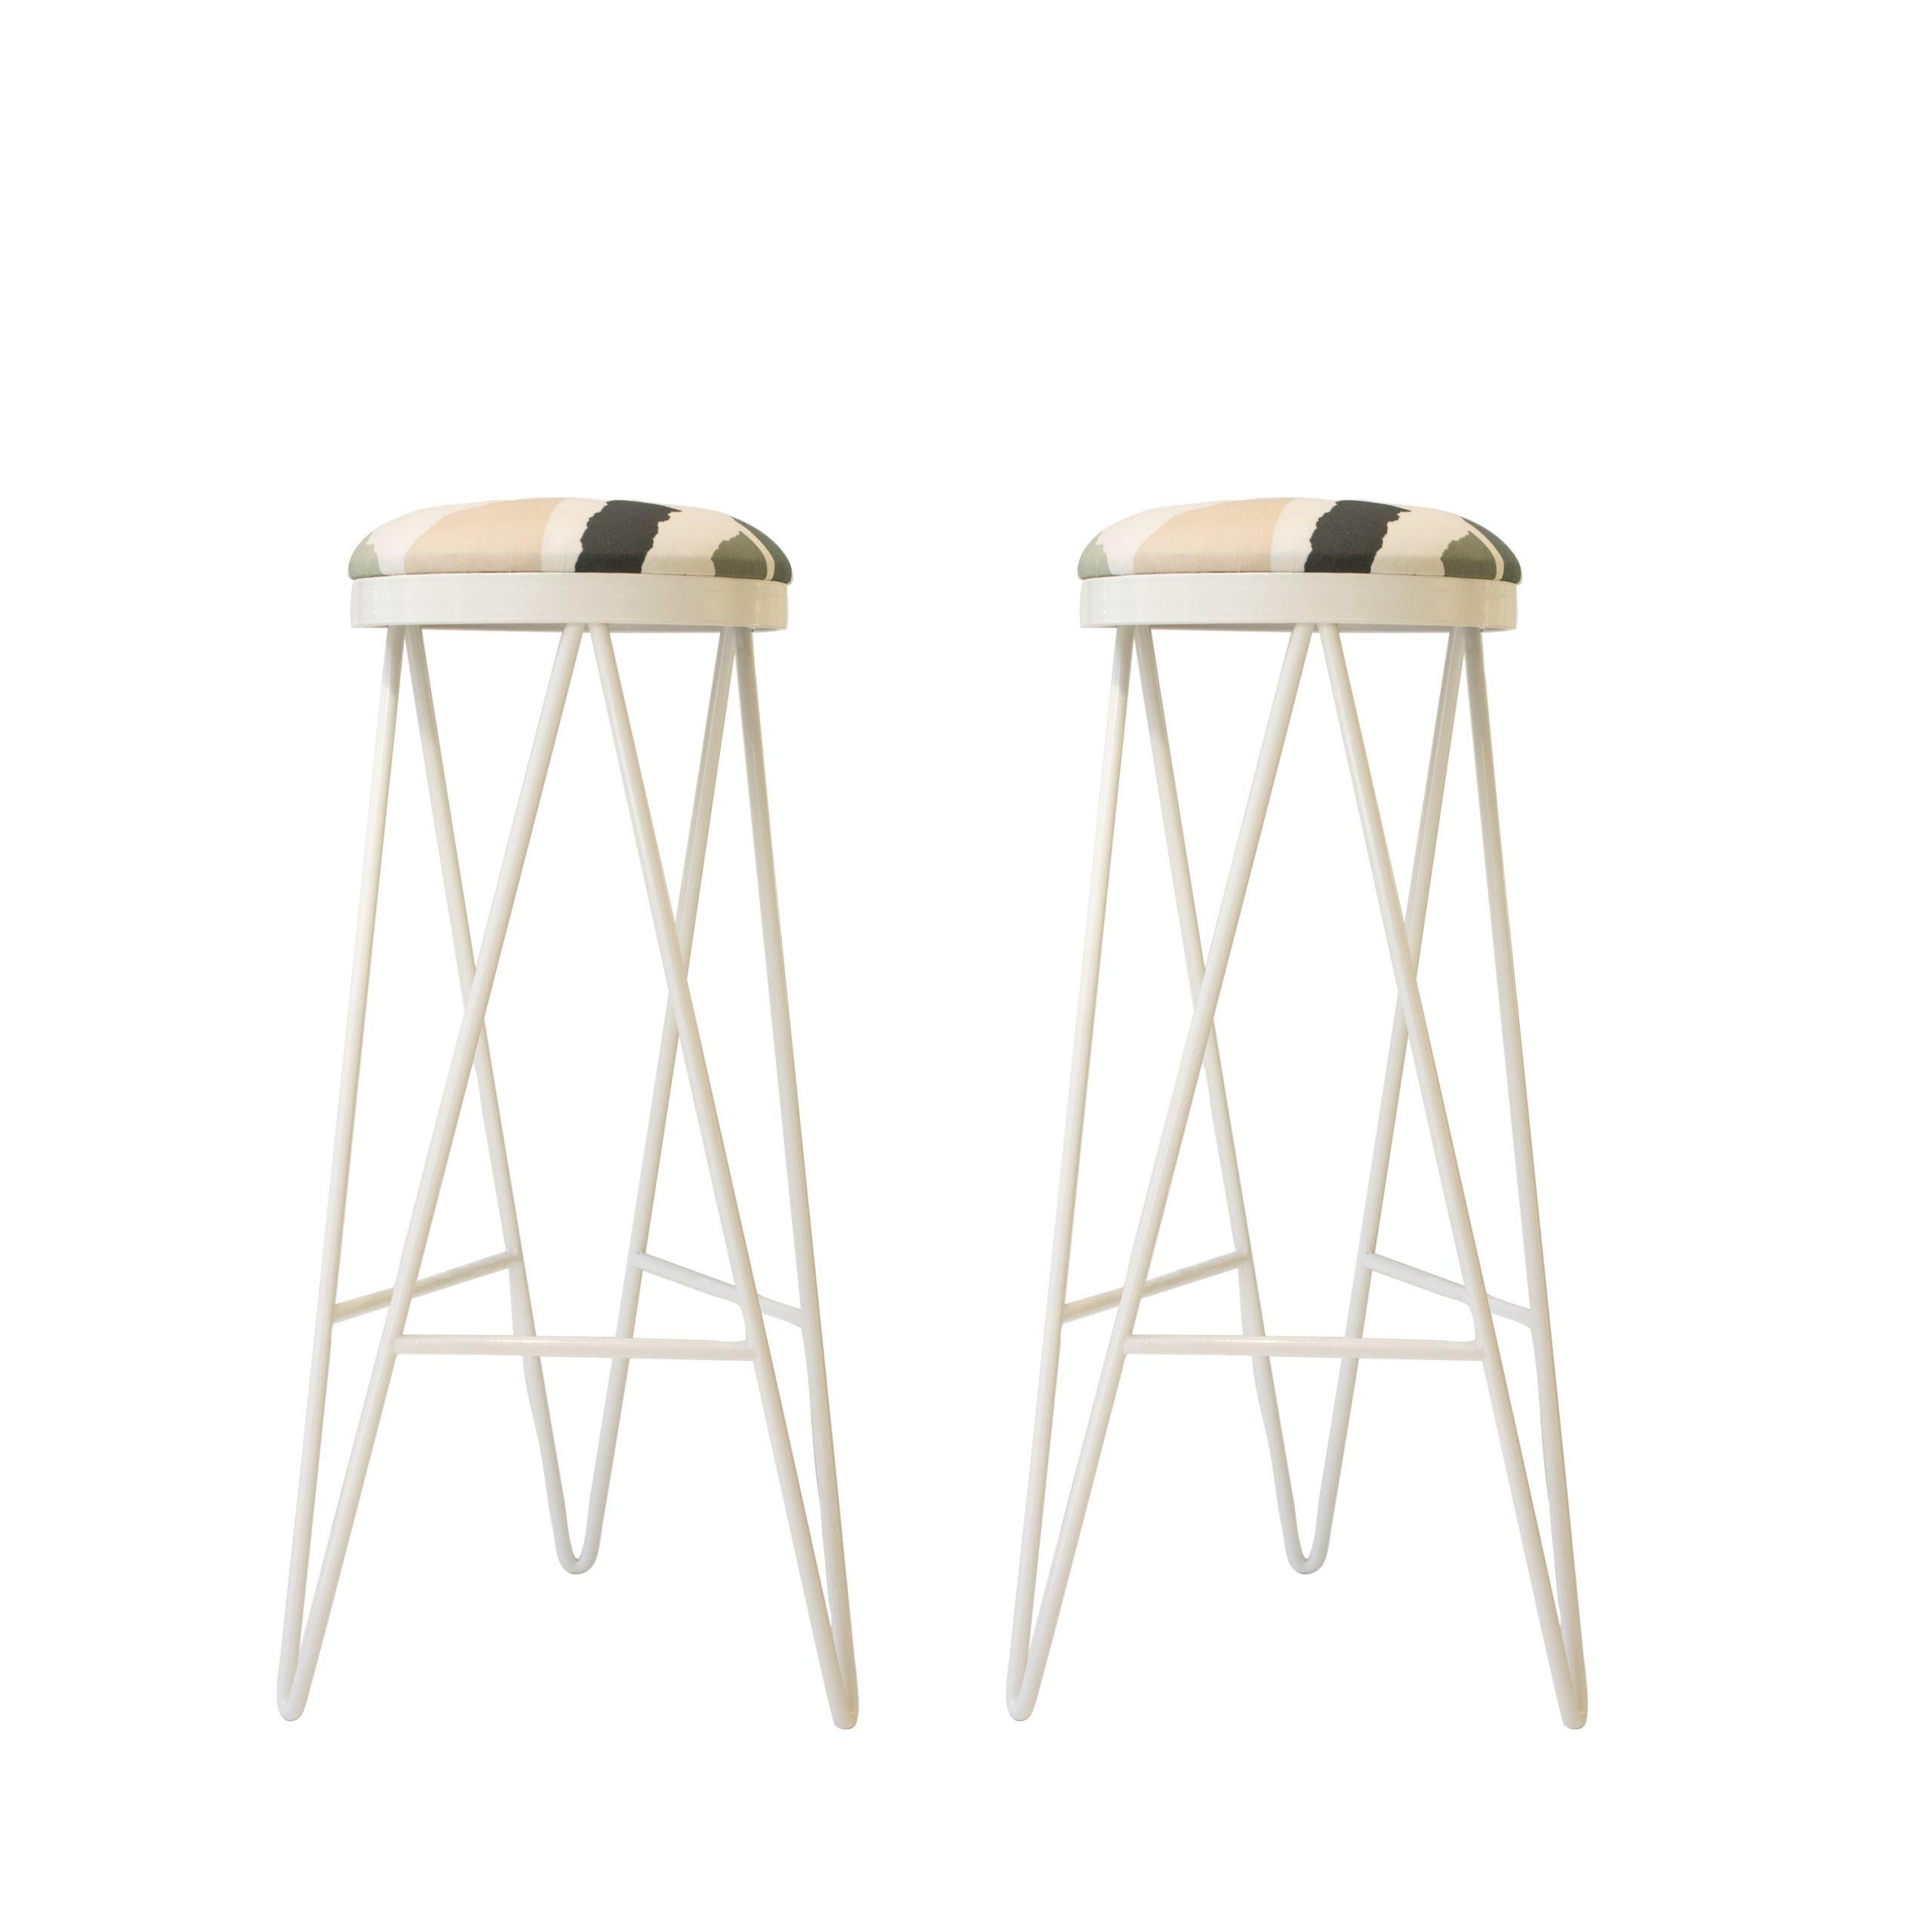 Contemporary Set of 8 Steel Stool Designed by IKB191 Studio , Spain, 2022 For Sale 1